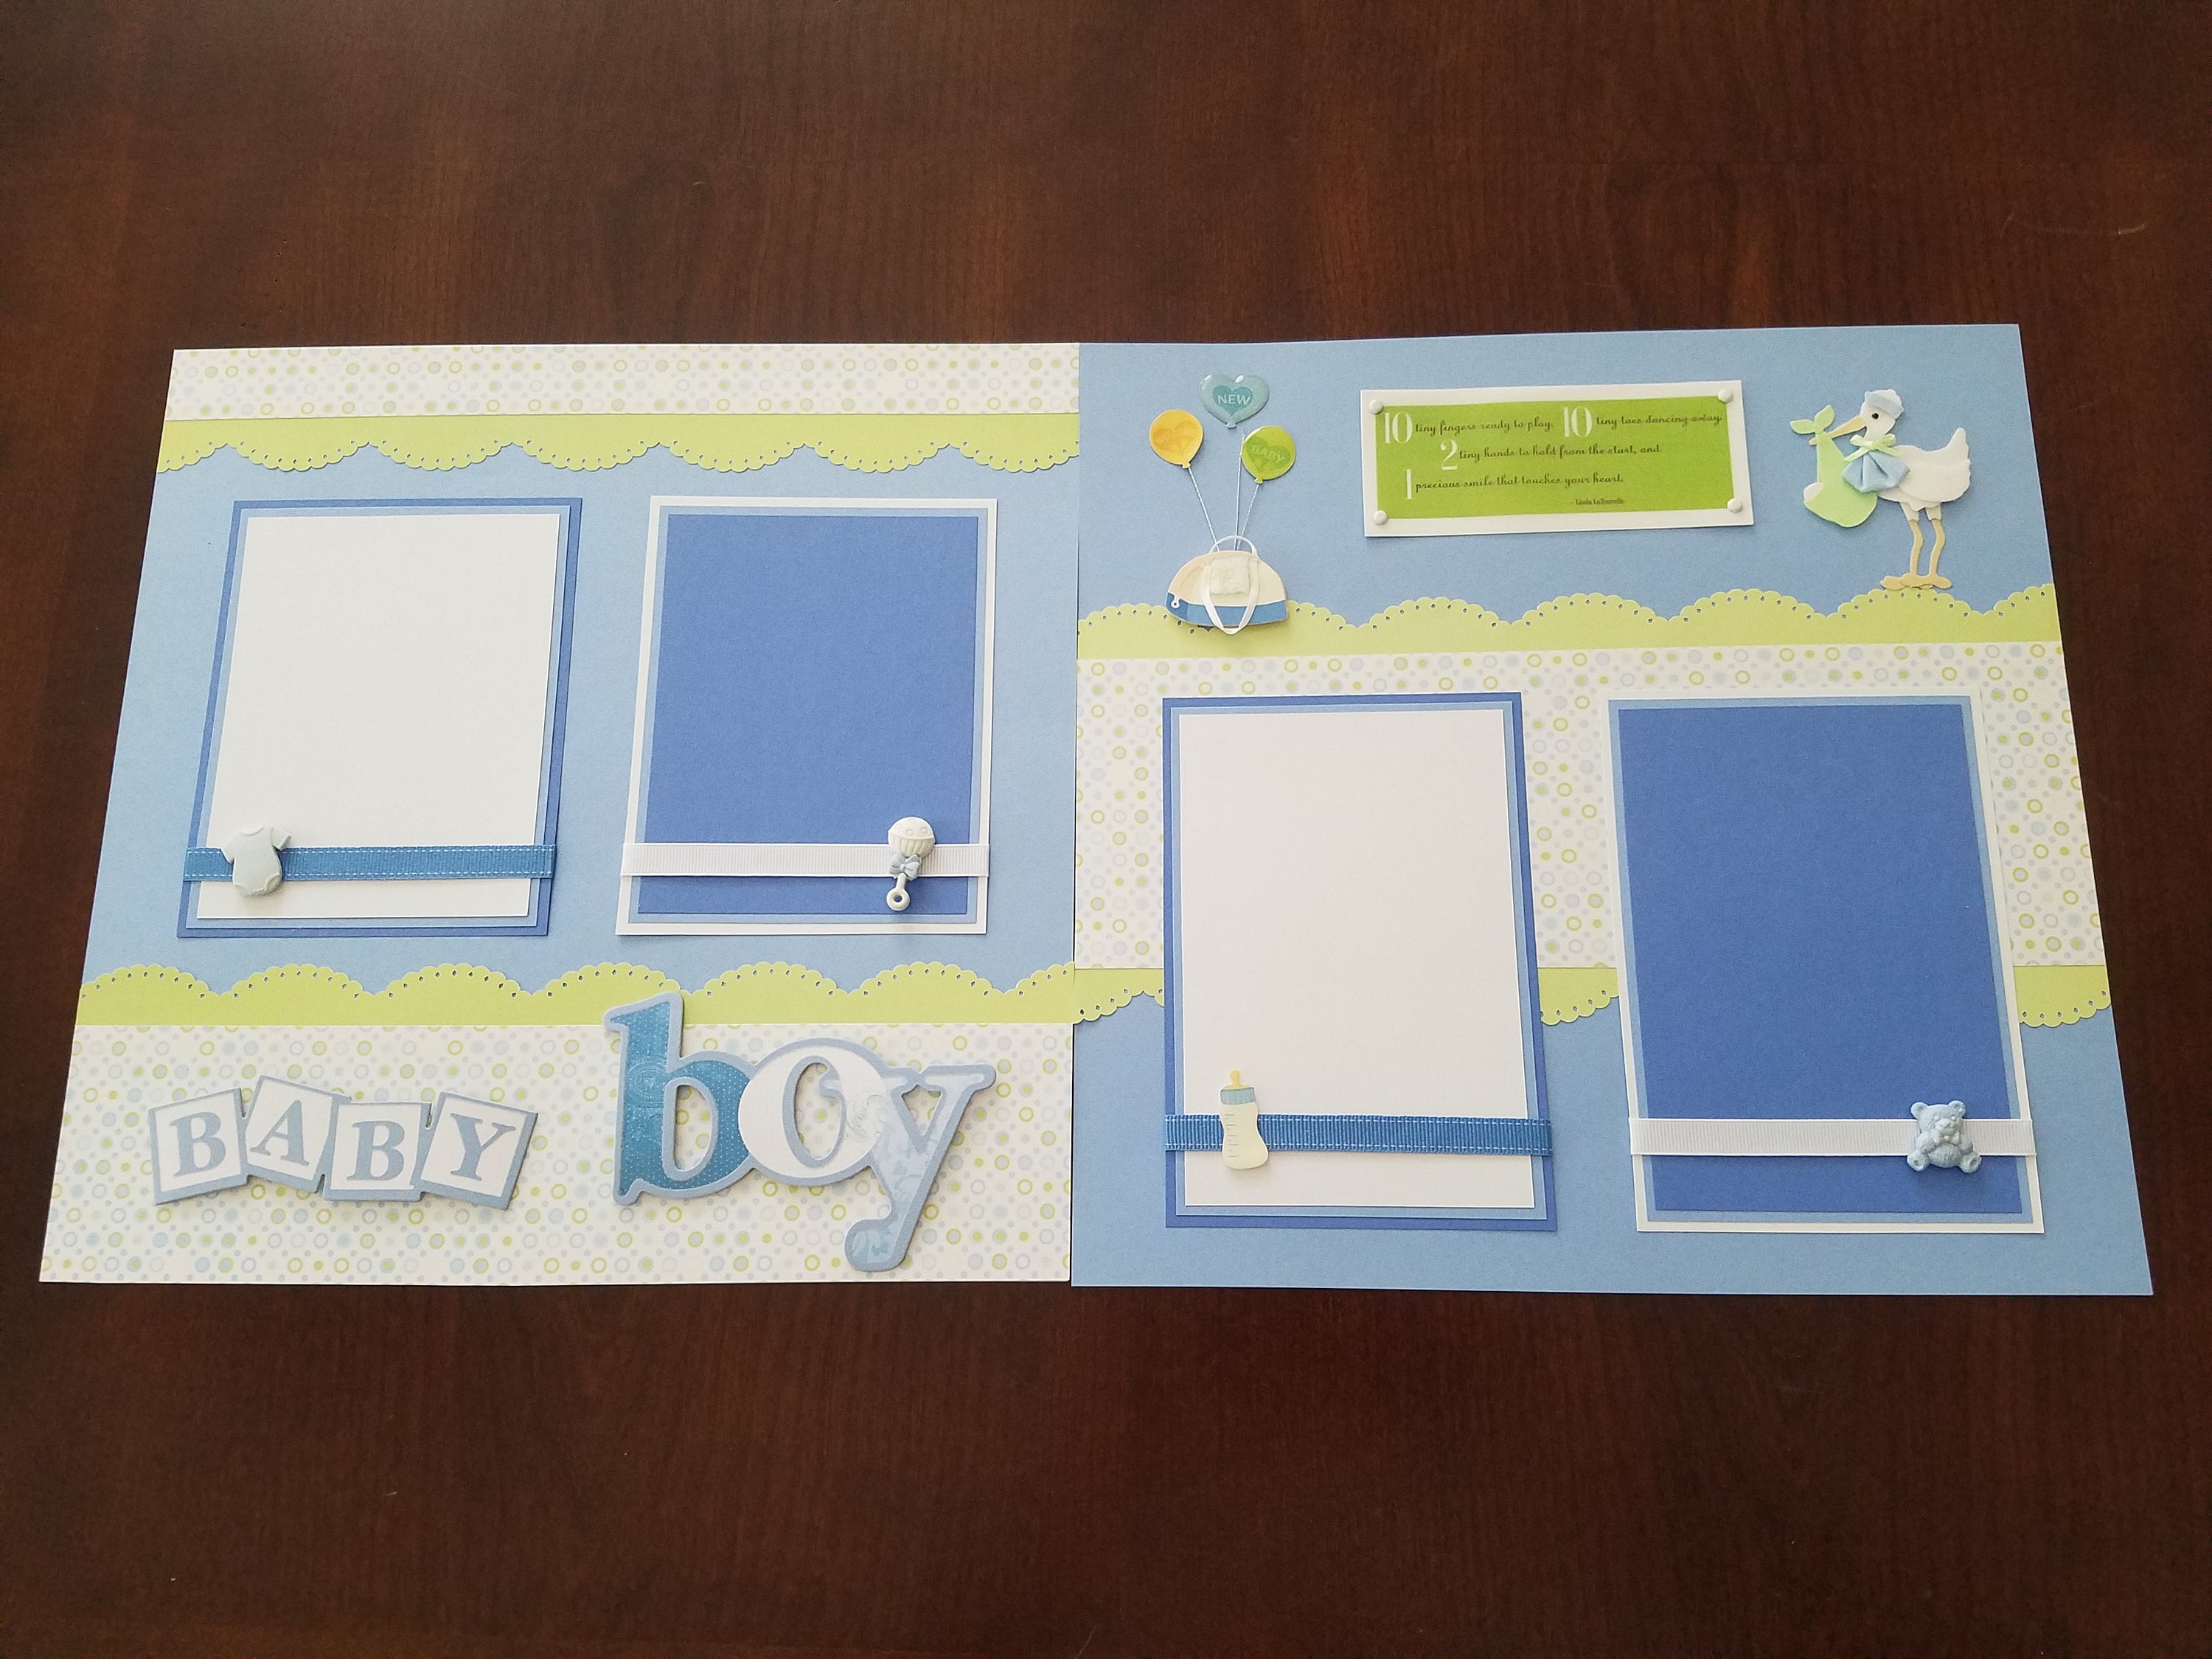 Baby Boy Scrapbook Layout 2 Page 12x12 Premade Welcome Baby Page Great Baby  Shower, Mother's Day or Holiday Gift or Party Decoration 